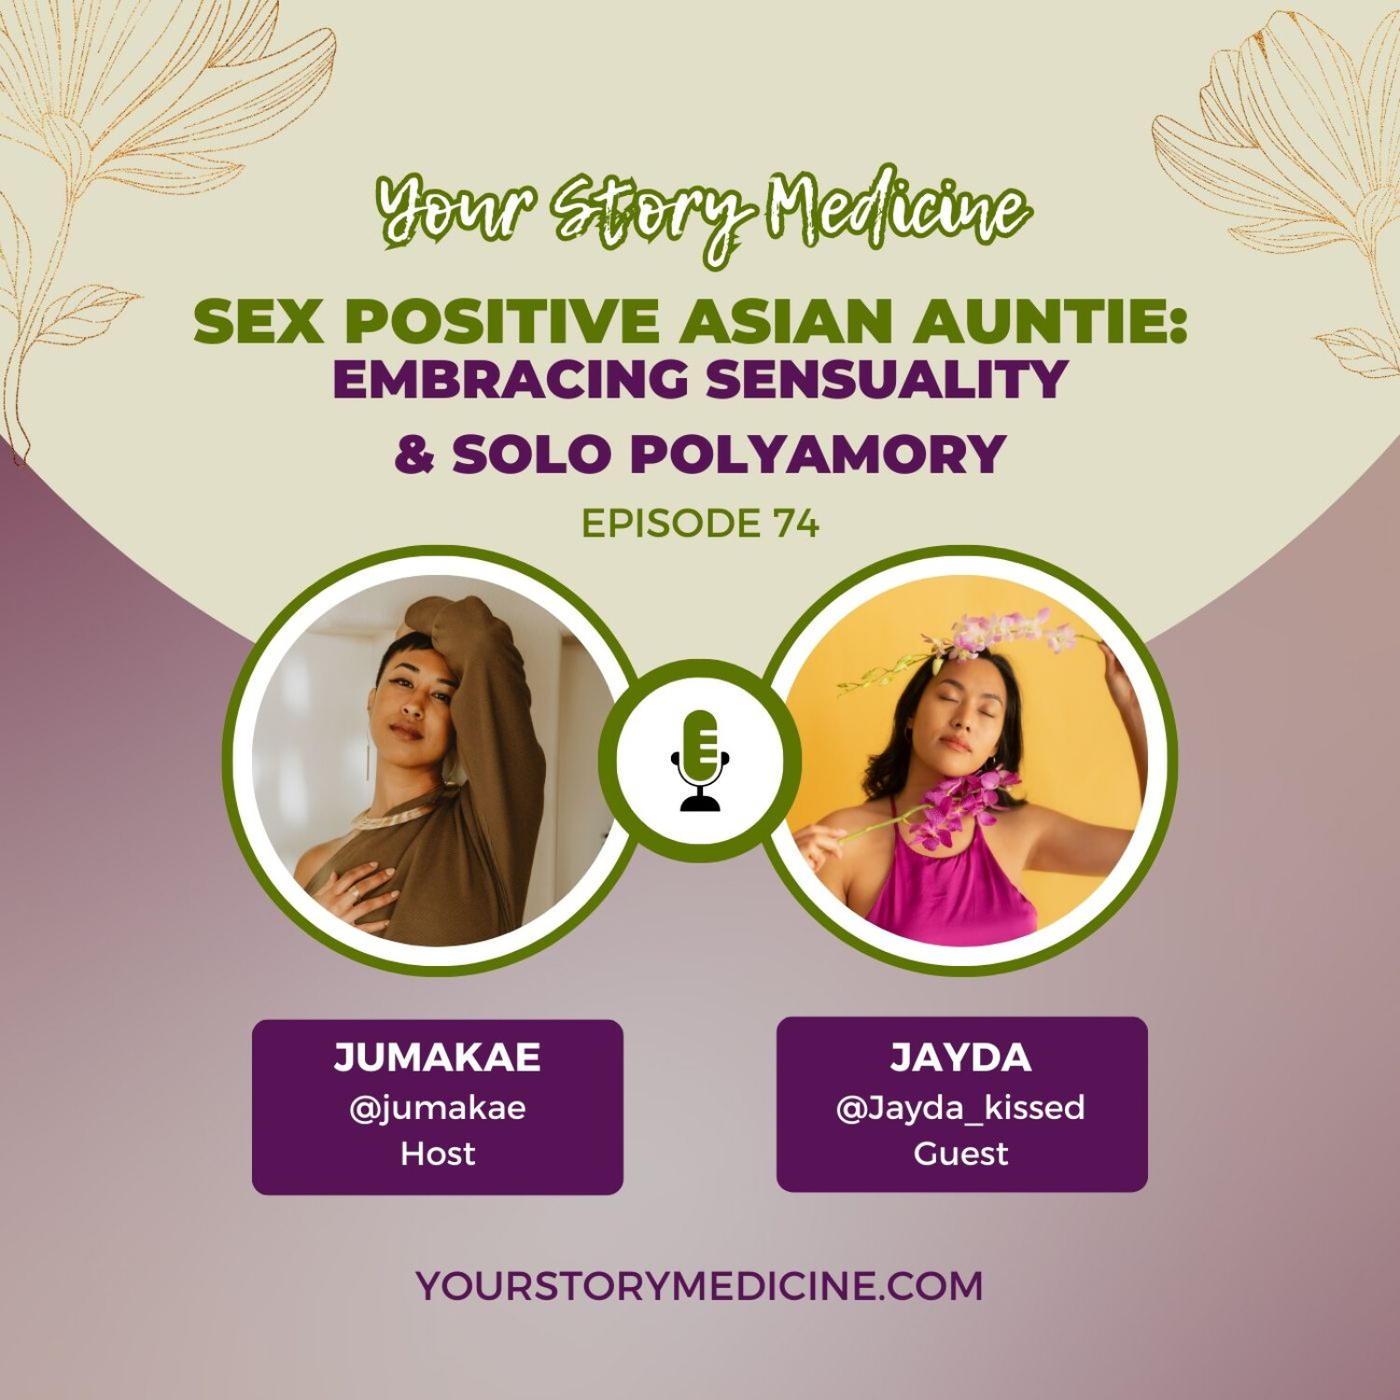 Sex Positive Asian Auntie Embracing Sensuality and Solo Polyamory with Jayda - Your Story Medicine photo